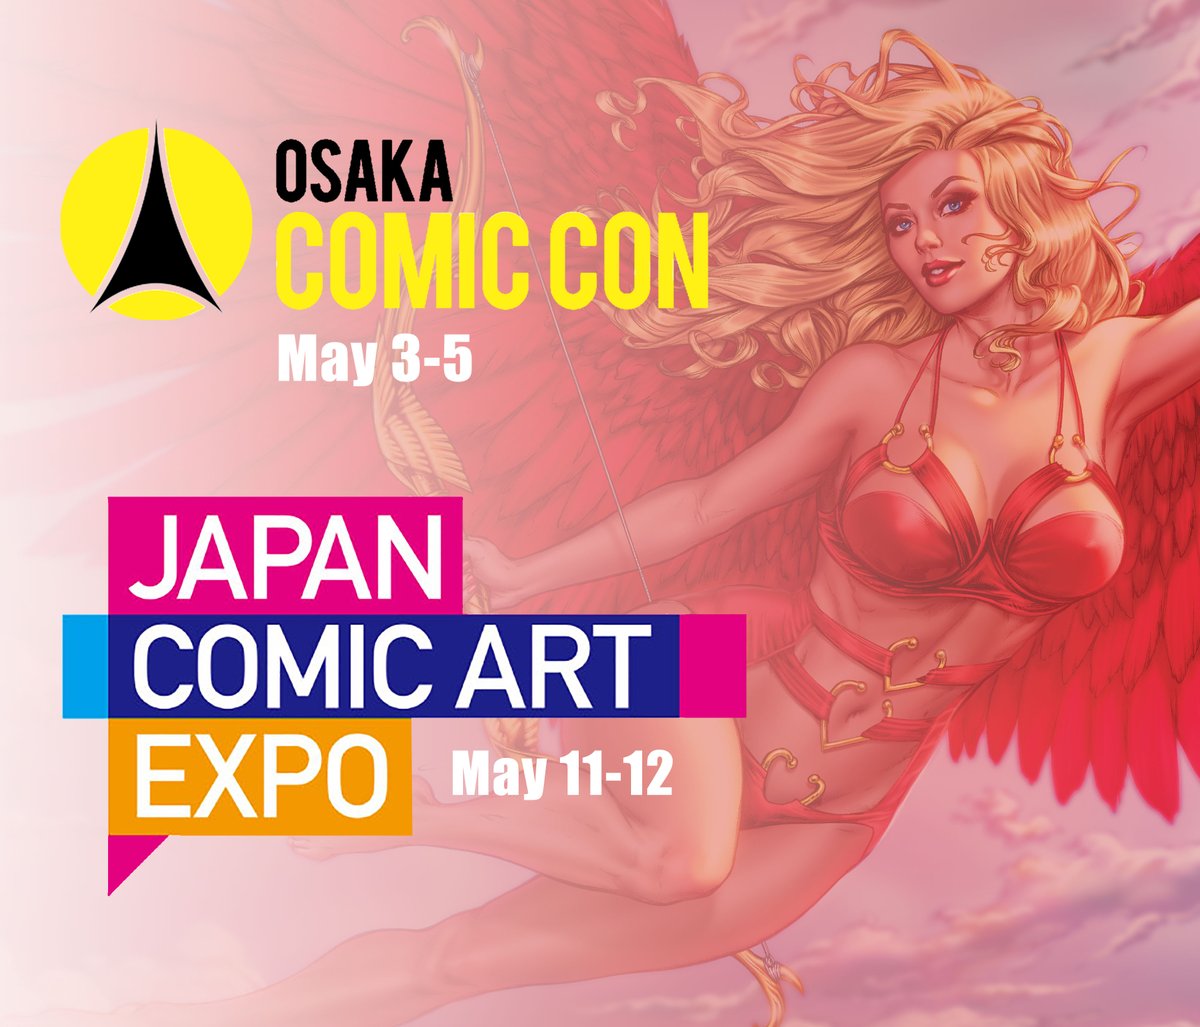 Very excited about visiting Japan for the first time. I'll be at @TokyoComicCon  and @JapanComicArtE2  from next week as the ambassadorial godsend no one asked for...can't wait!